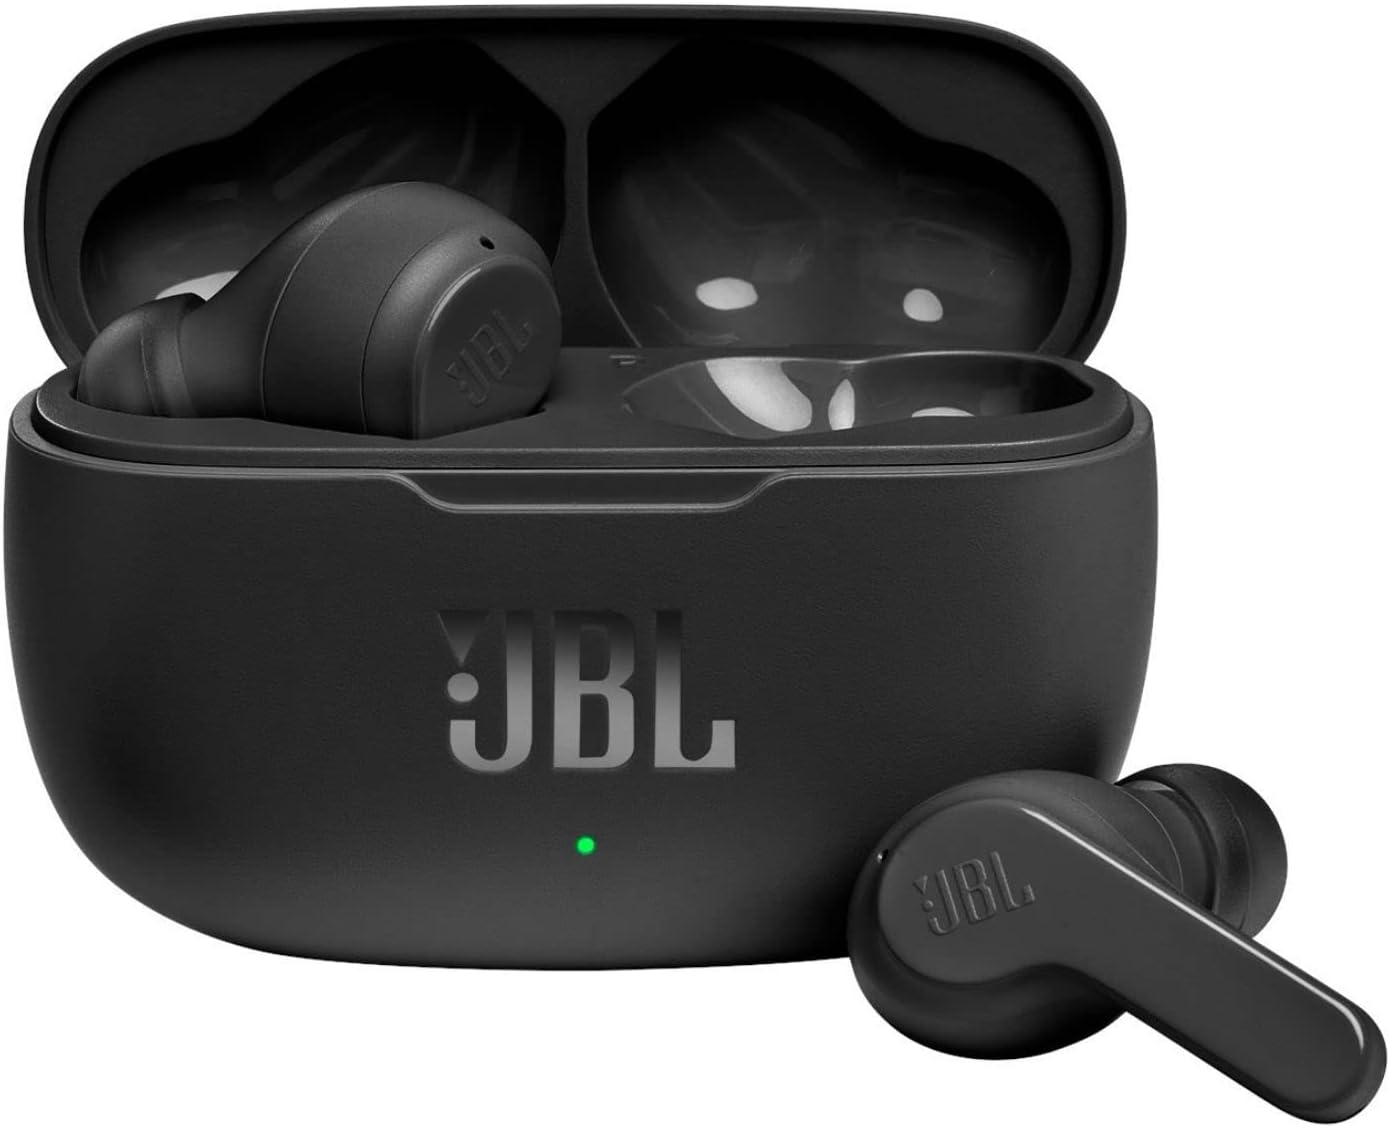 JBL Earbuds: Explore the Superior Sound Quality